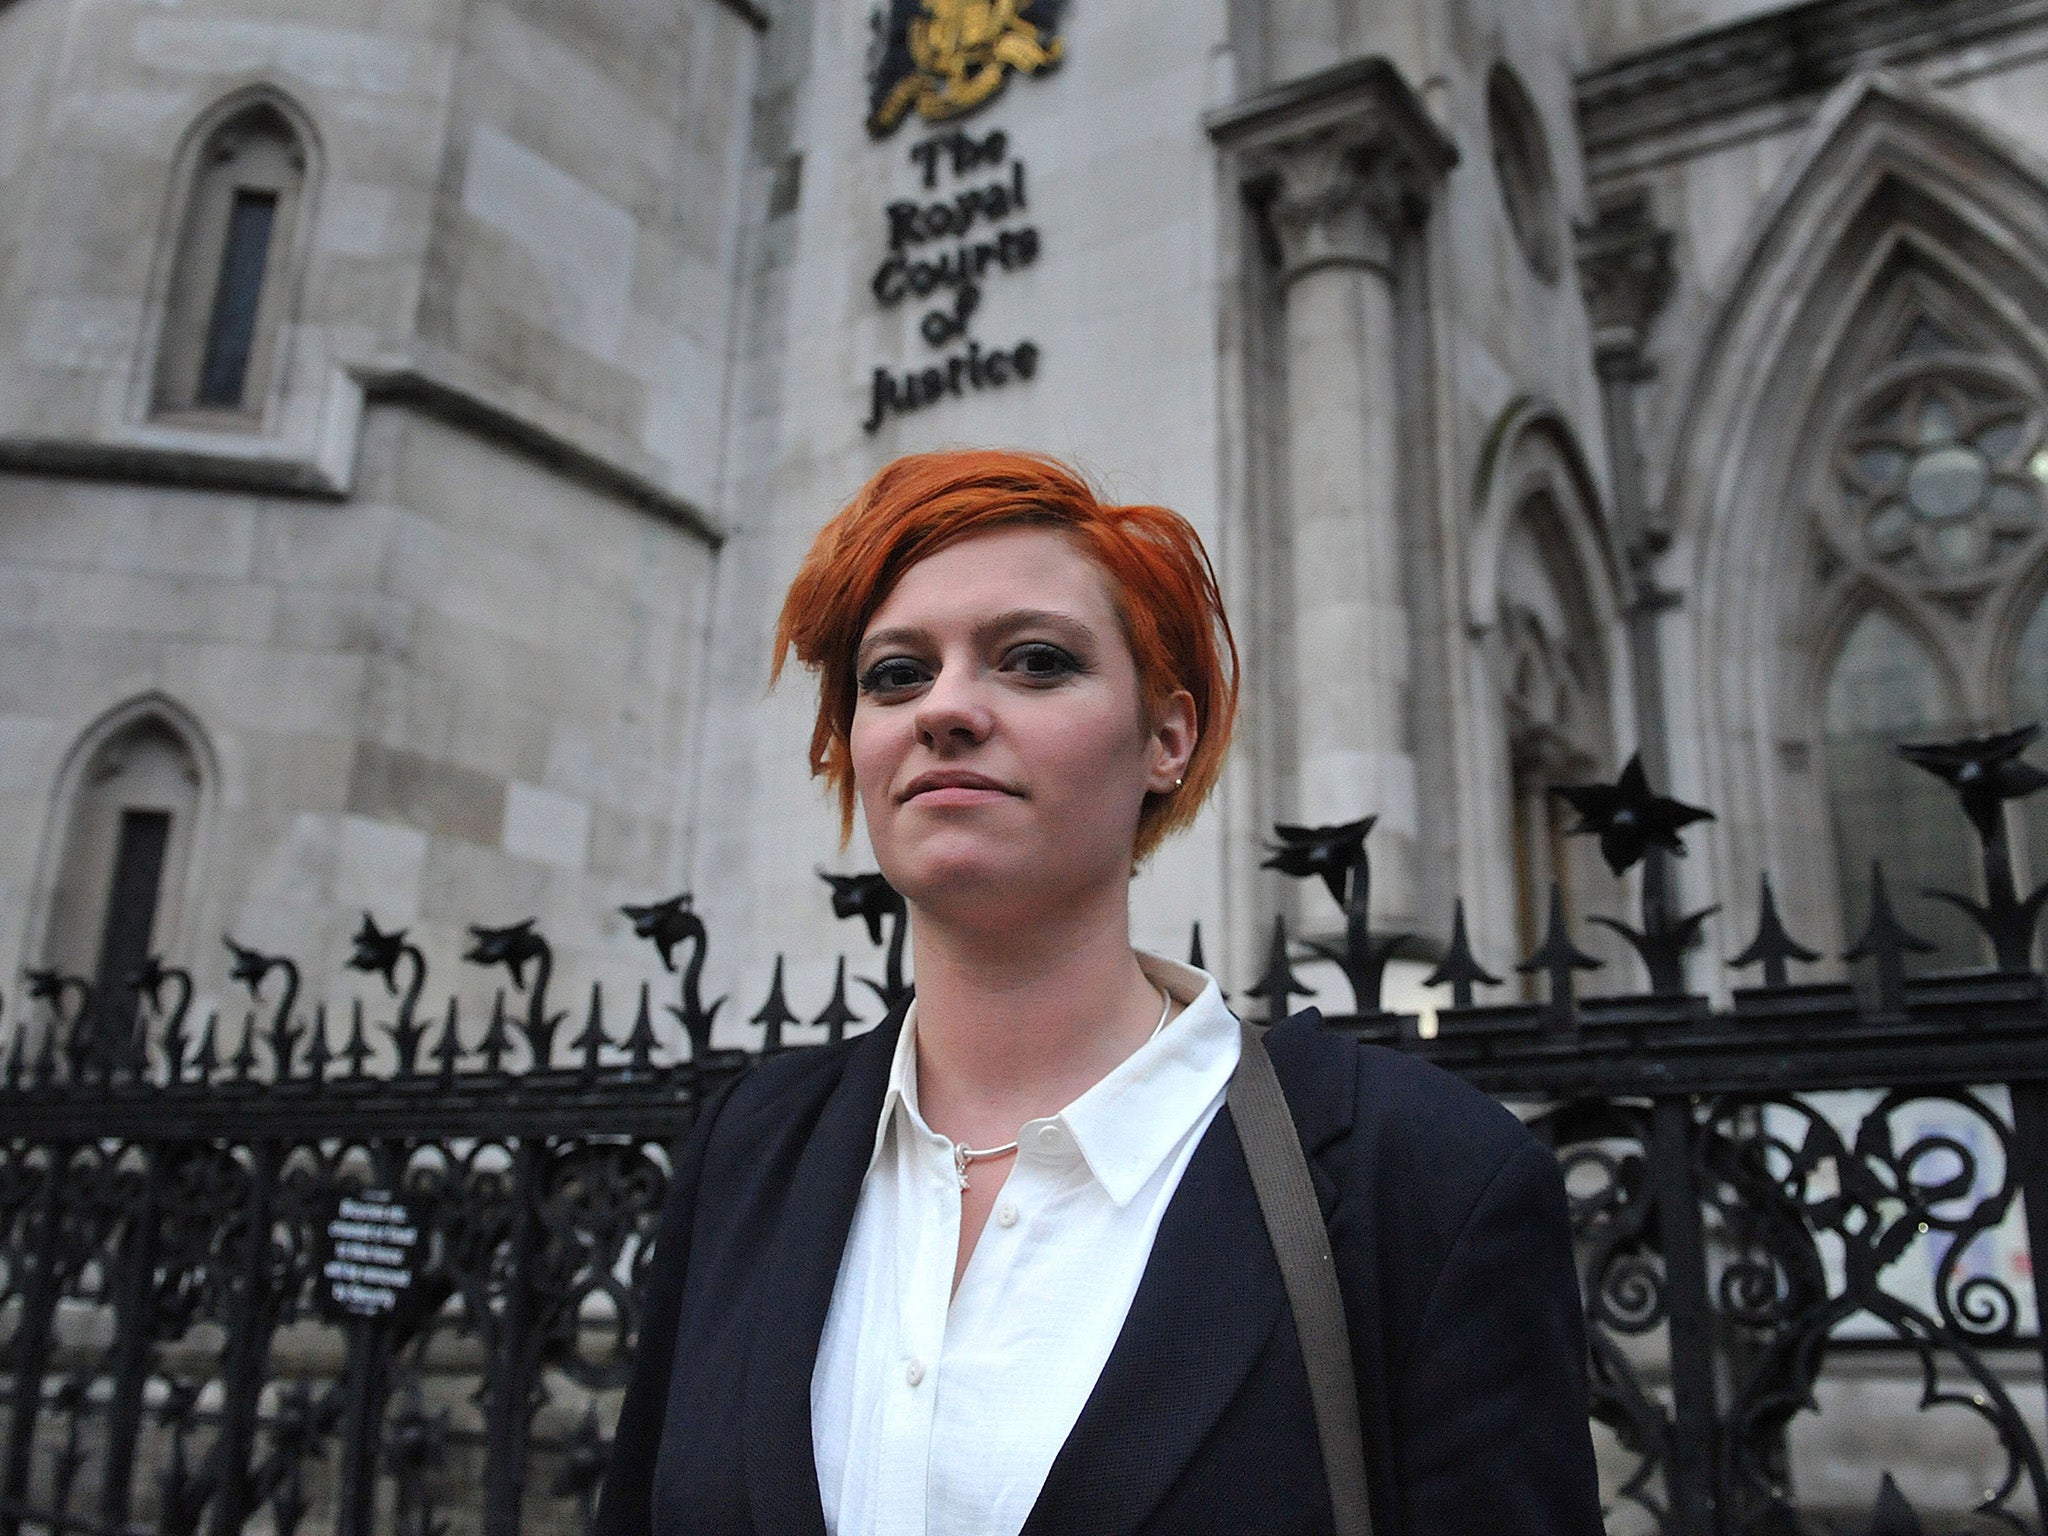 Monroe has won £24,000 in damages in a libel action against Katie Hopkins